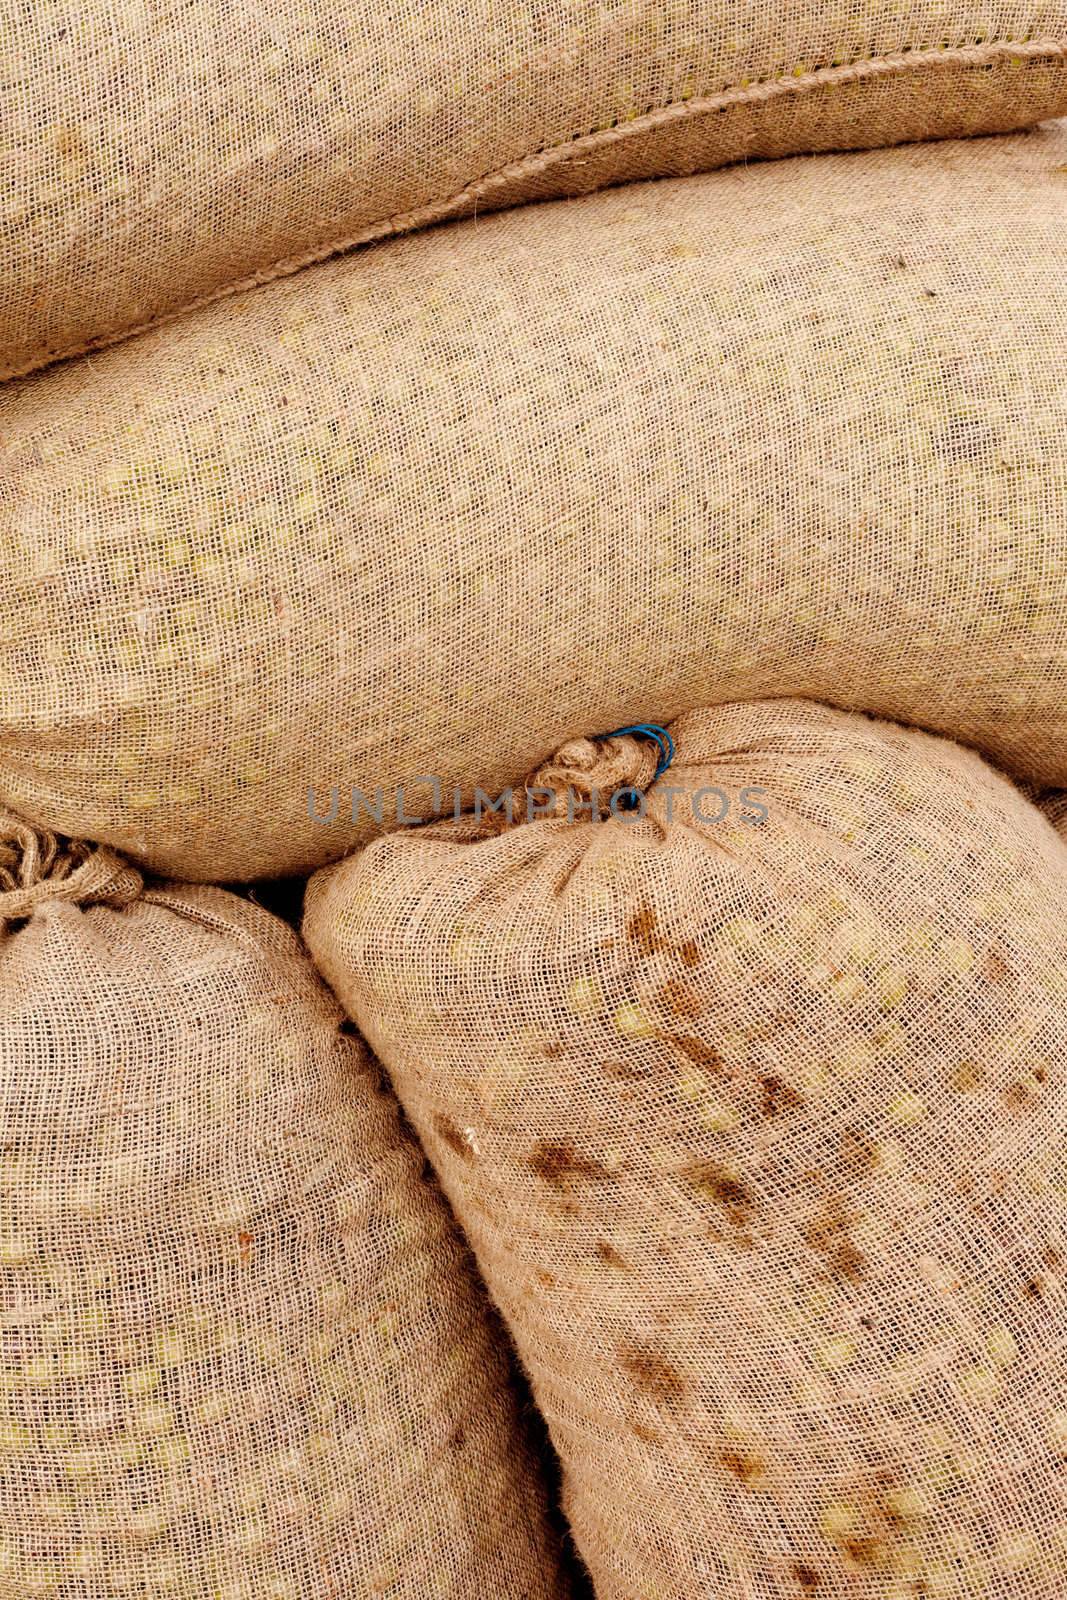 Background texture pattern of sacks filled with freshly harvested olives.